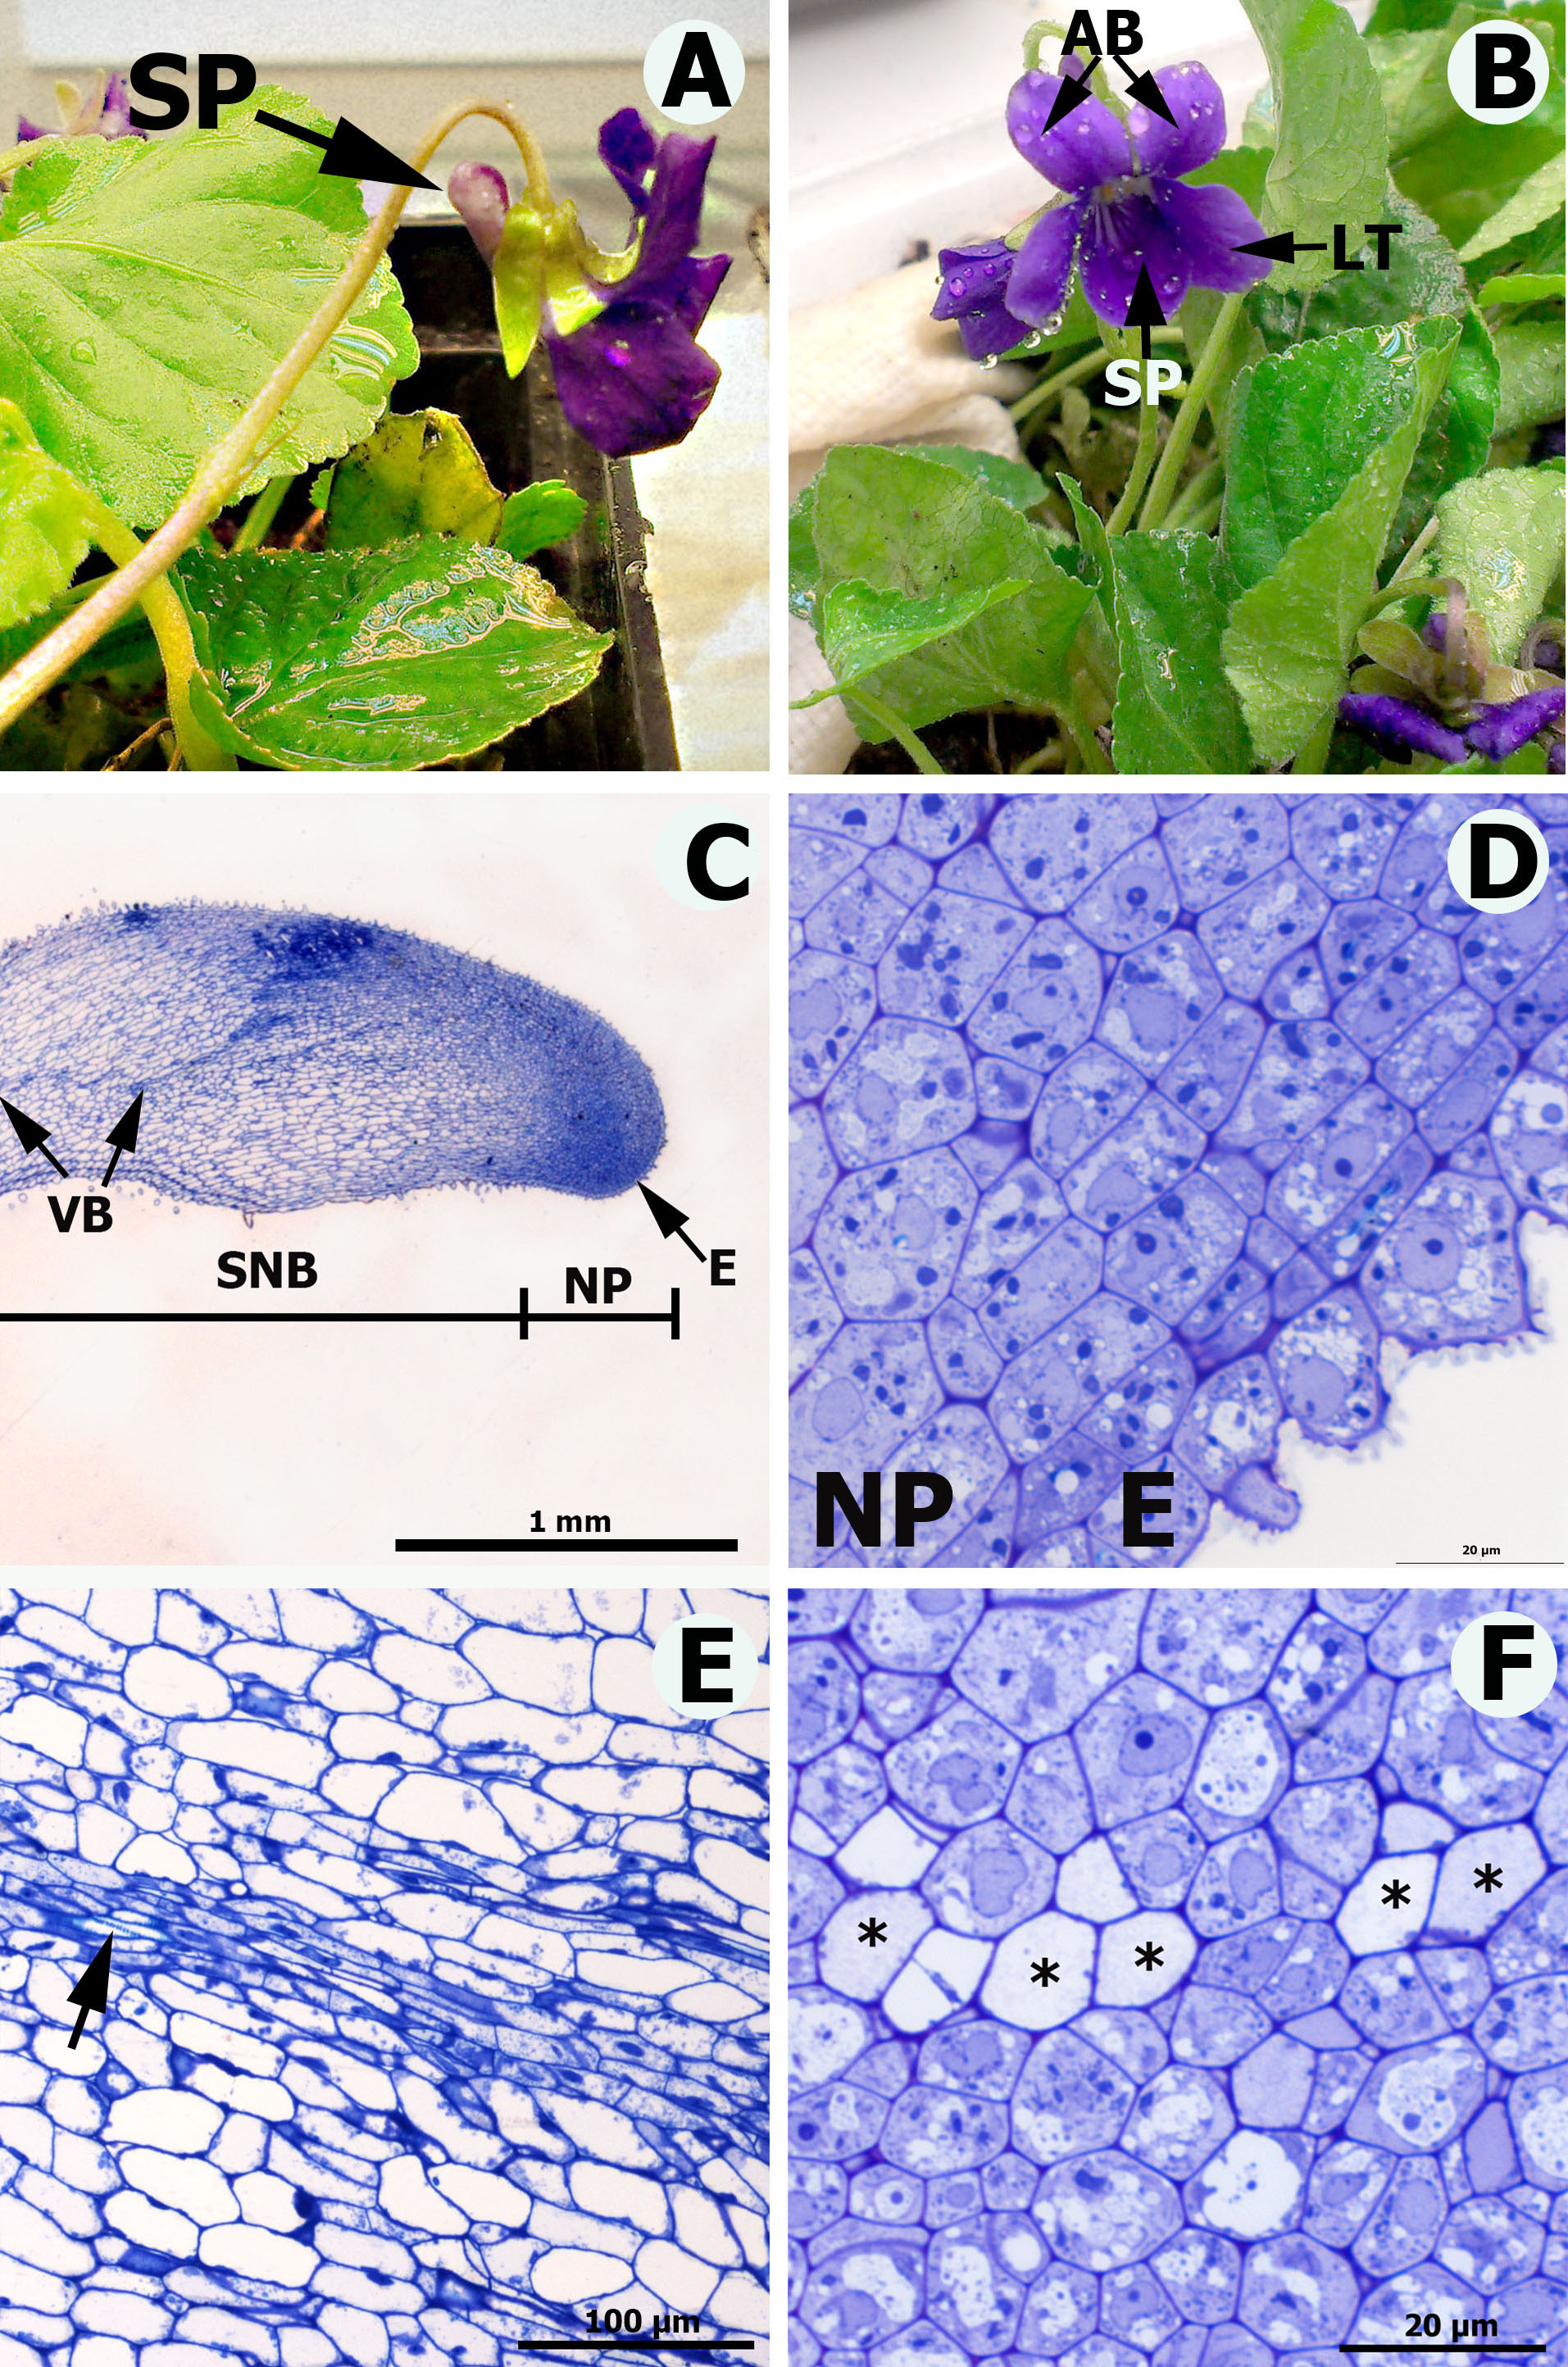 Fig. 1. Viola odorata: A, B – flowers, each made by five sepals of three kinds in shape, two above alike (AB), two on each side alike (LT) and one that has a spur (SP); C – longitudinal section of nectary consisting of epidermis (E), nectary parenchyma (NP) and subnectary parenchyma (SBN) with vascular bundle (VB) (LM, TBO); D – magnification of C, the top part of the nectary including epidermis (E) and nectary parenchyma (NP), note small cells with densely staining cytoplasm; E – subnectary parenchyma with vascular bundle (VB), containing xylem indicated by arrow; F – nectary parenchyma with phloem cells (asterisks).